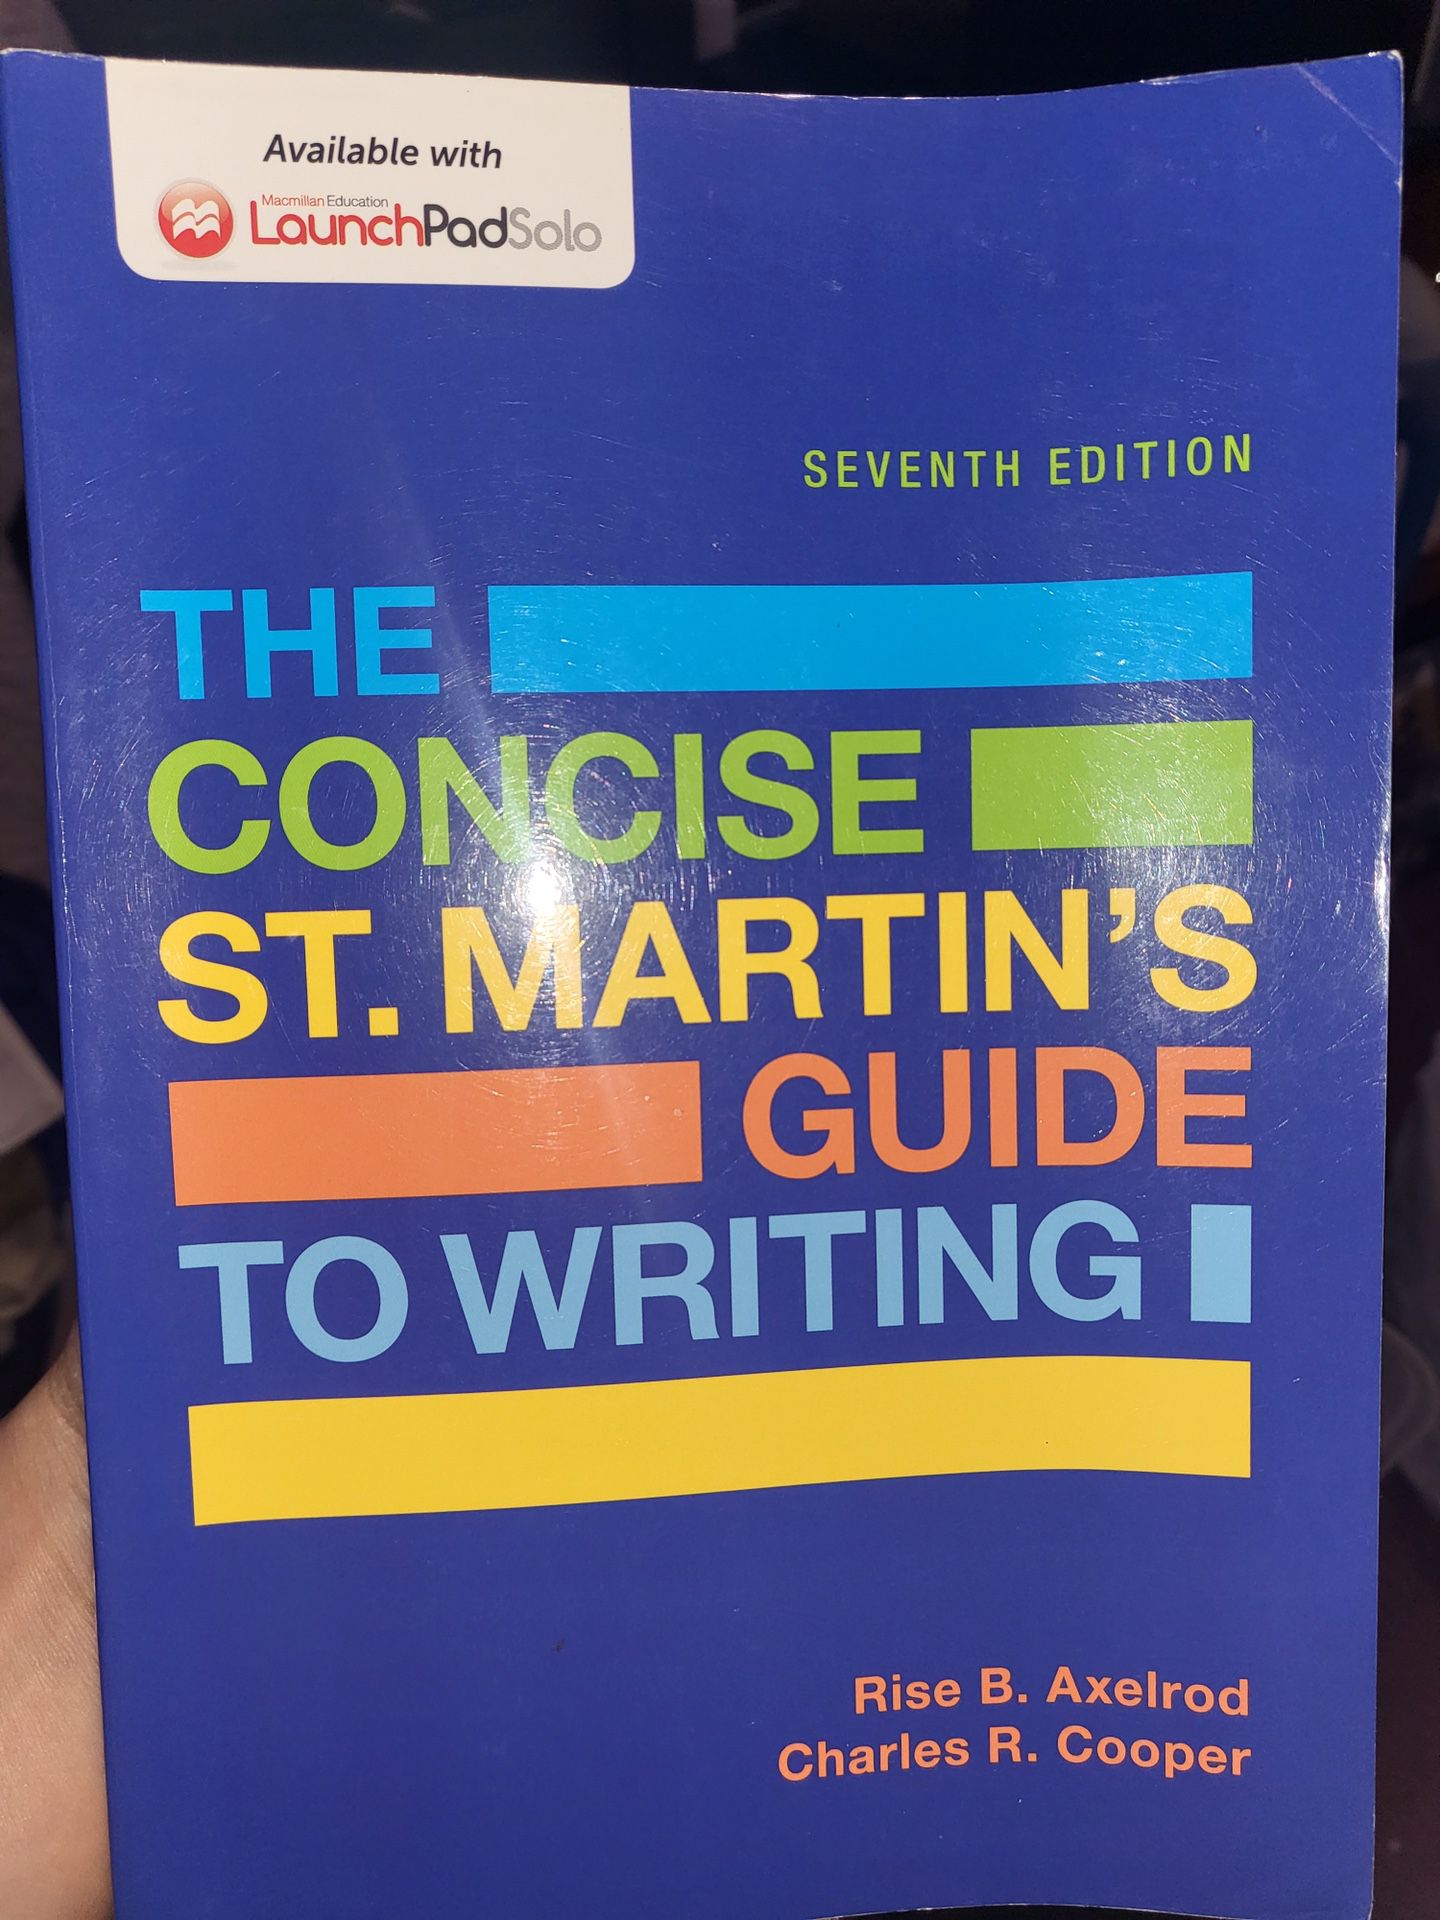 The Concise St. Martin's Guide to Writing